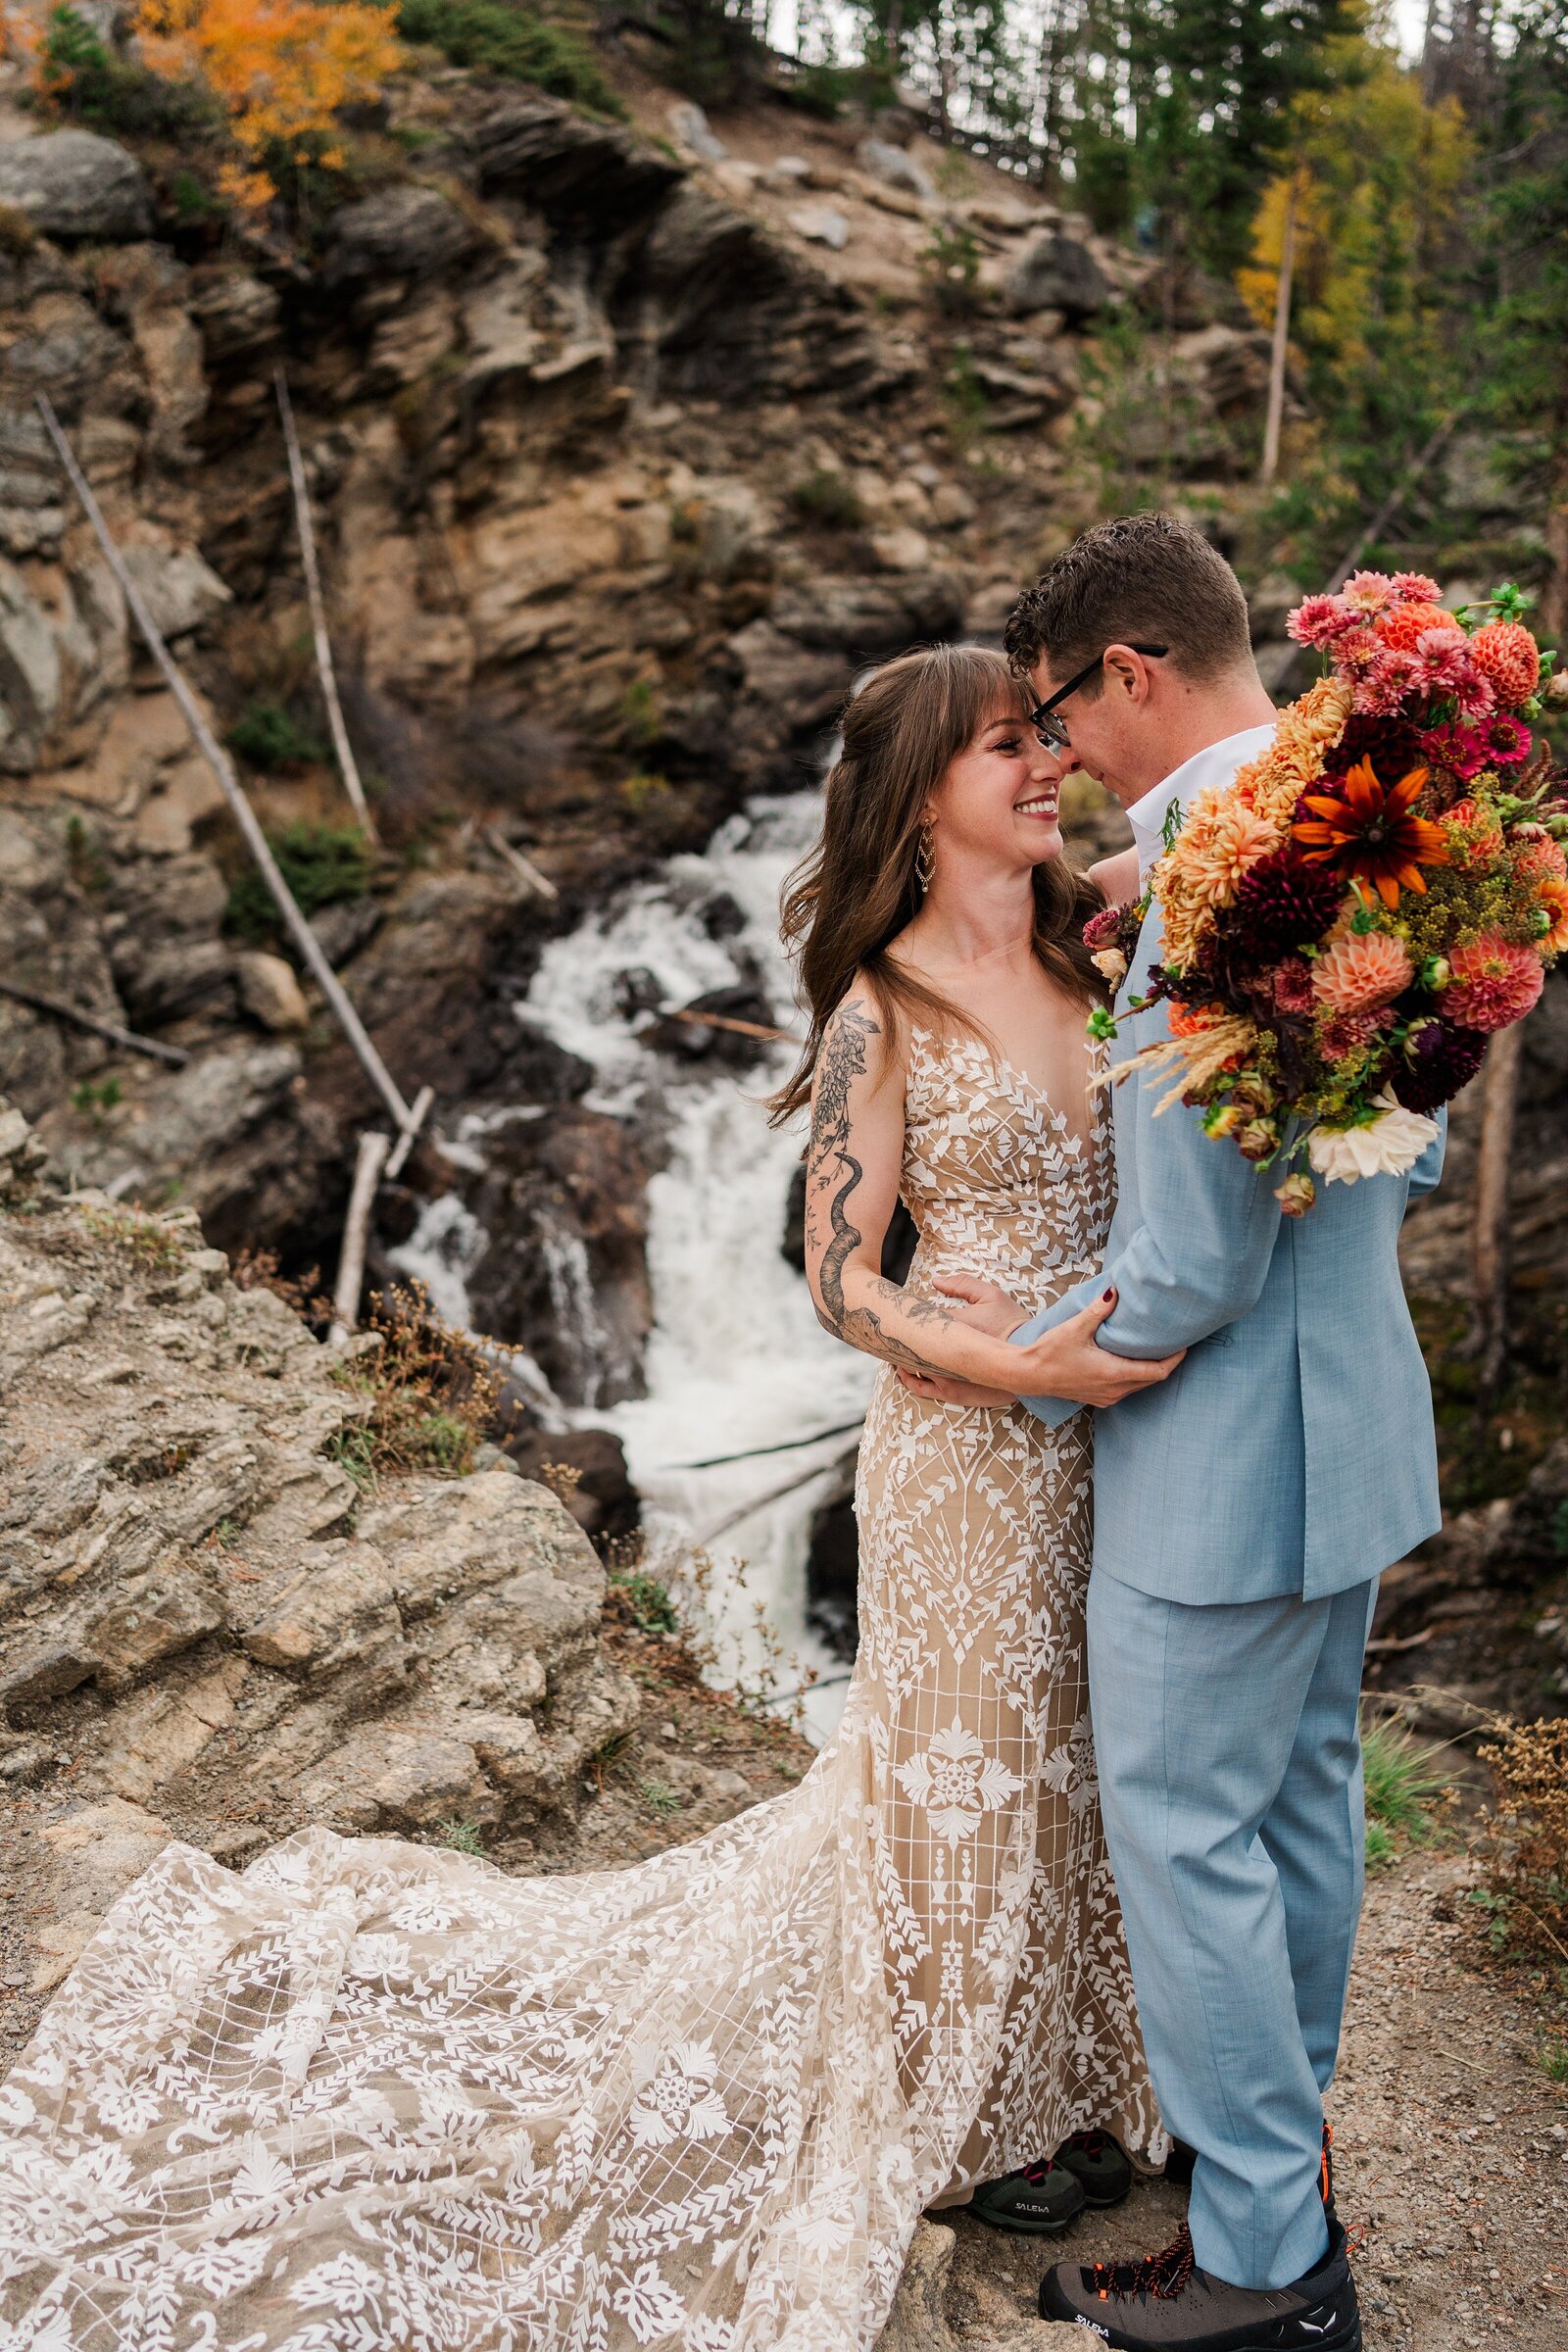 Make your proposal unforgettable with Samantha Immer Photography. Our storytelling approach will capture the authenticity and romance of your special moment.